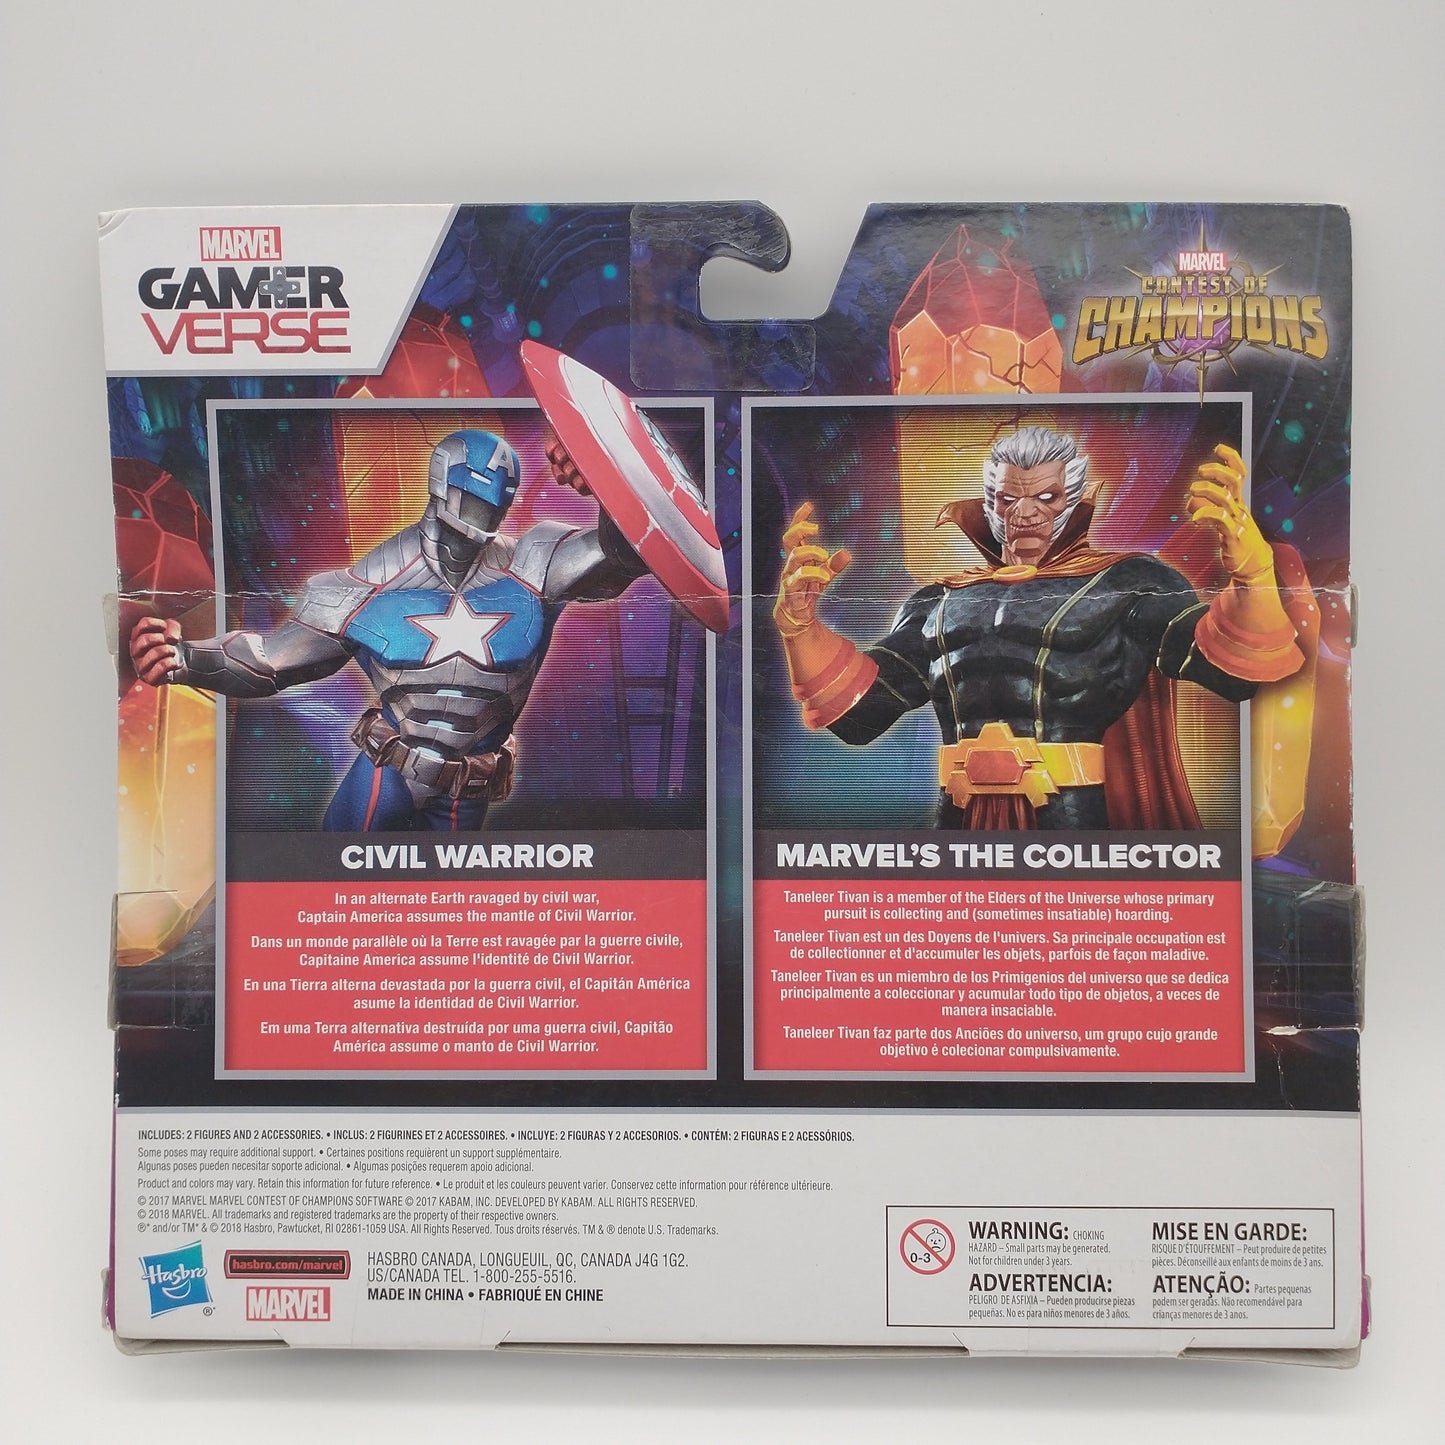 The back of the card featuring images of the action figure and a summary of information about them. It is illegible in the picture.